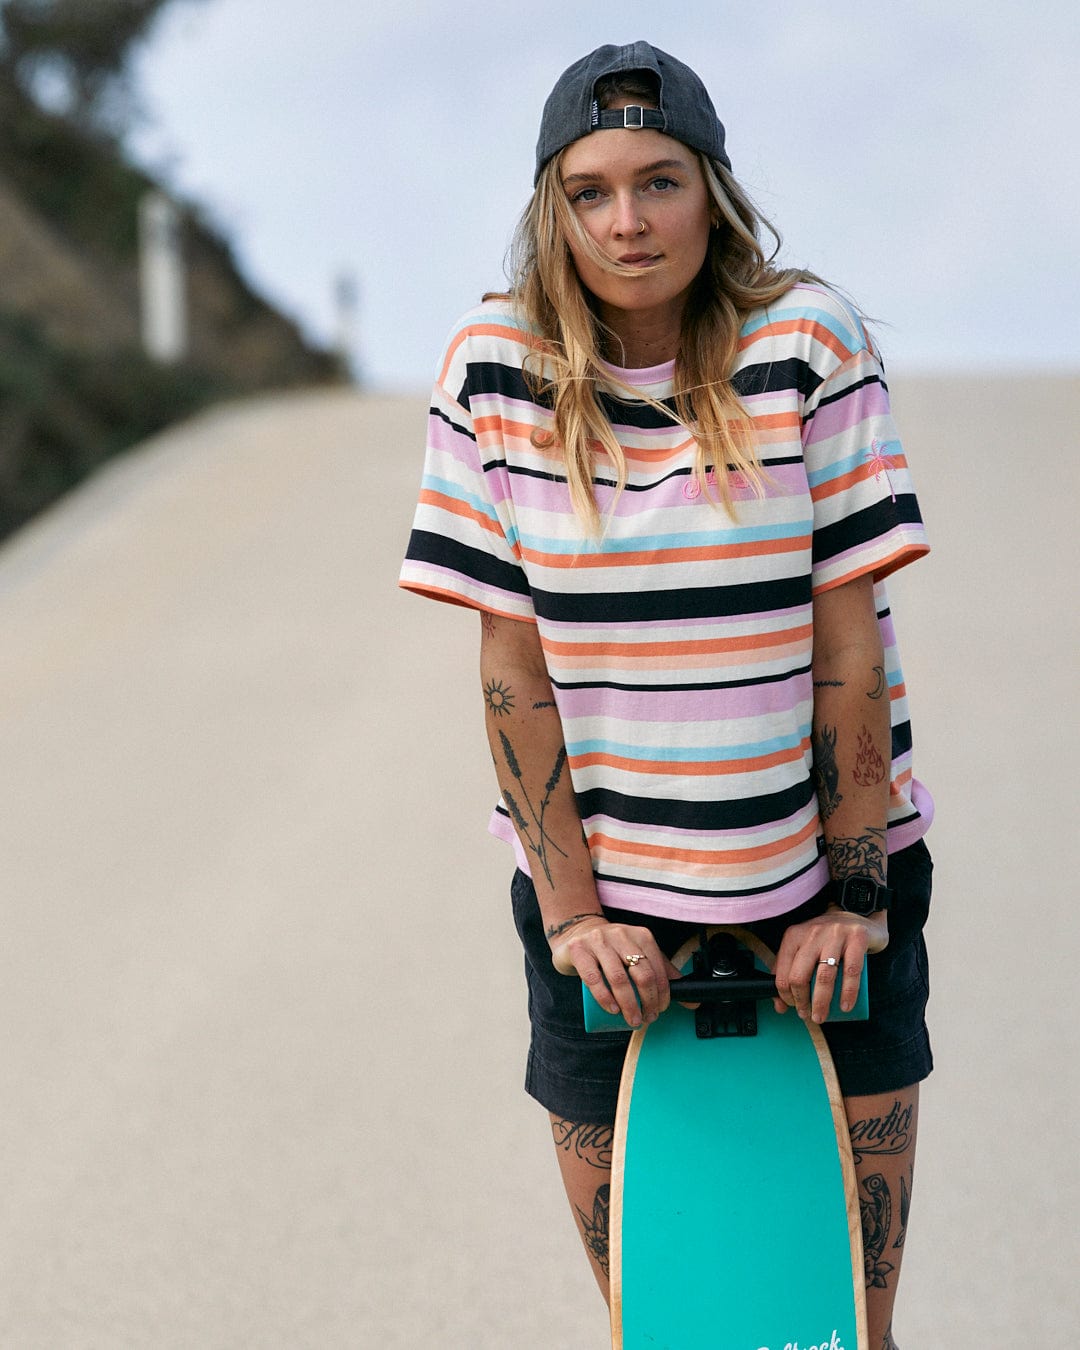 A person holding a skateboard on a paved path, wearing a Saltrock Juno - Womens Short Sleeve T-Shirt - Multi with a stripe pattern and a baseball cap.